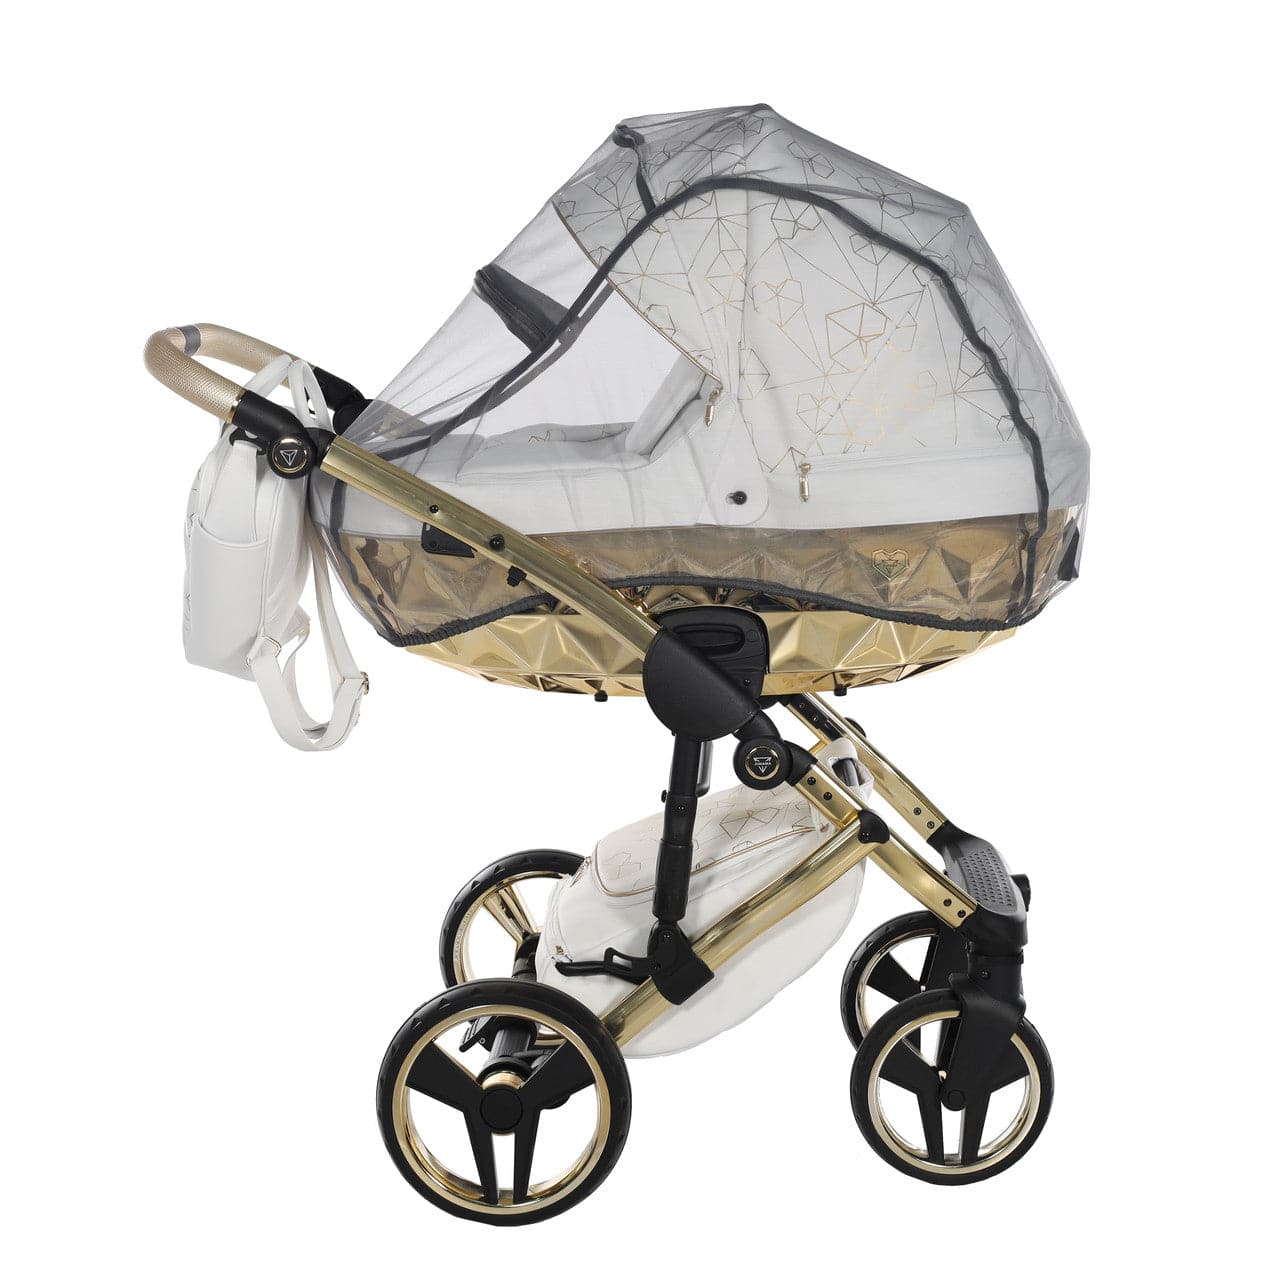 Junama Heart 3 In 1 Travel System - White Gold - For Your Little One